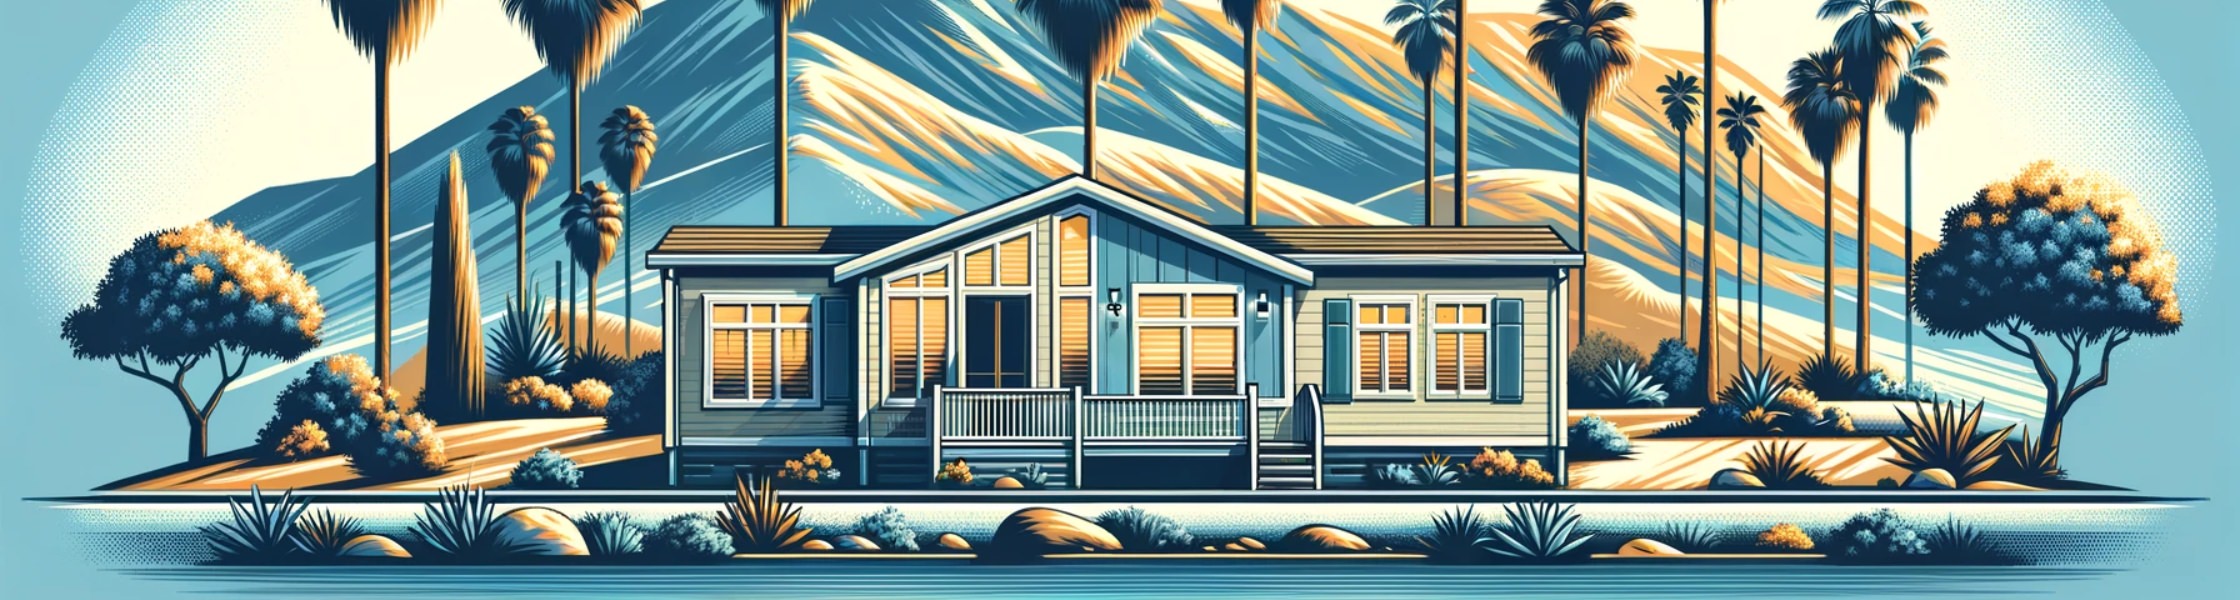 Elegant California-style manufactured home in a serene California setting with palm trees and hills, perfect for an article on mobile home insurance, in stylish blue hues